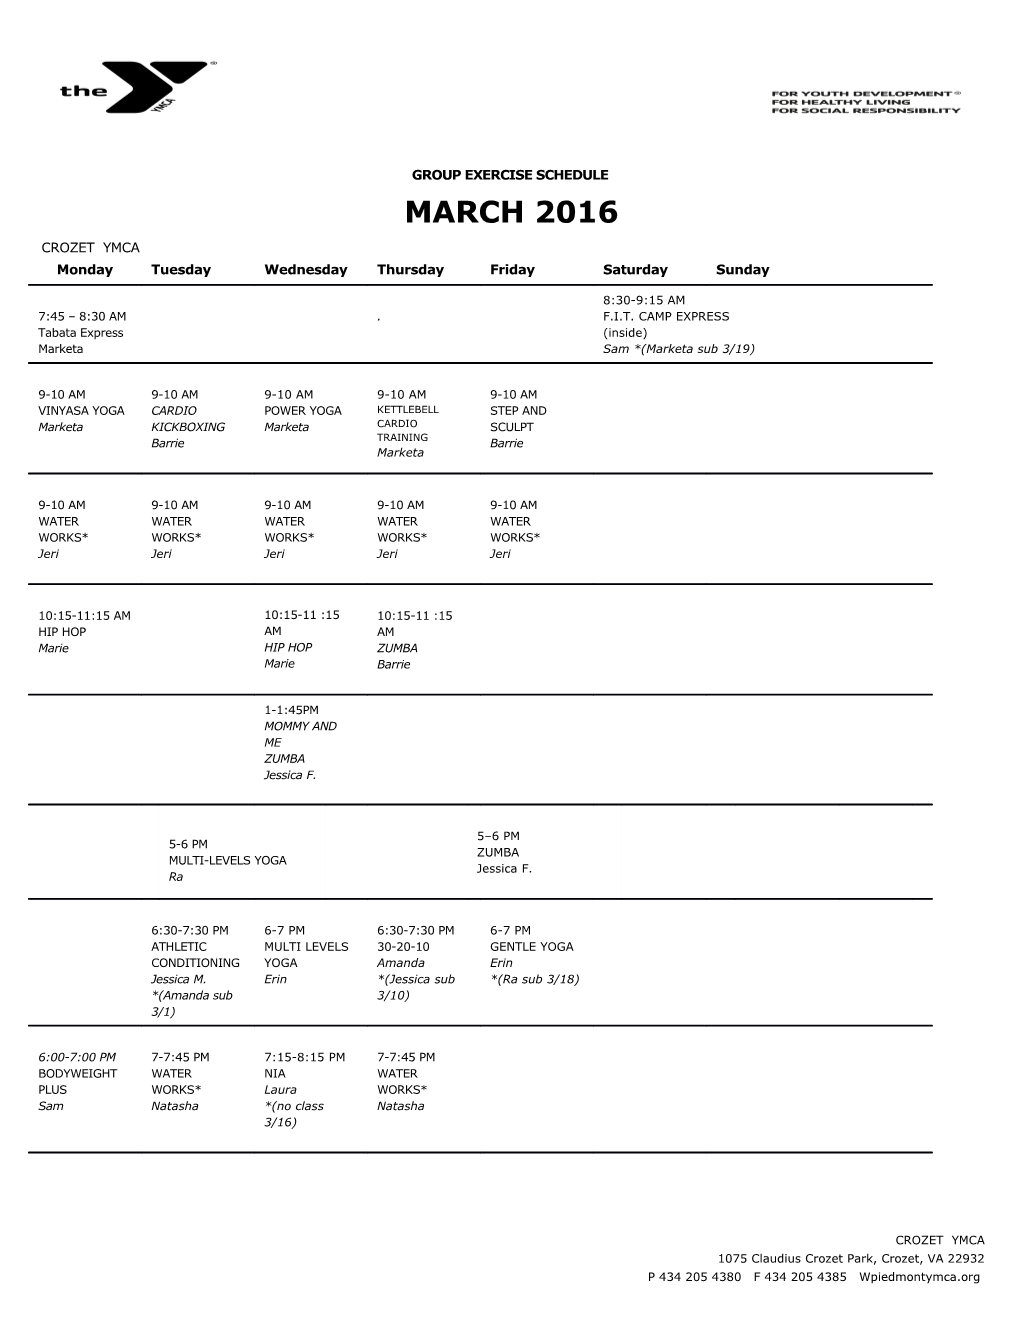 Group Exercise Schedule s1